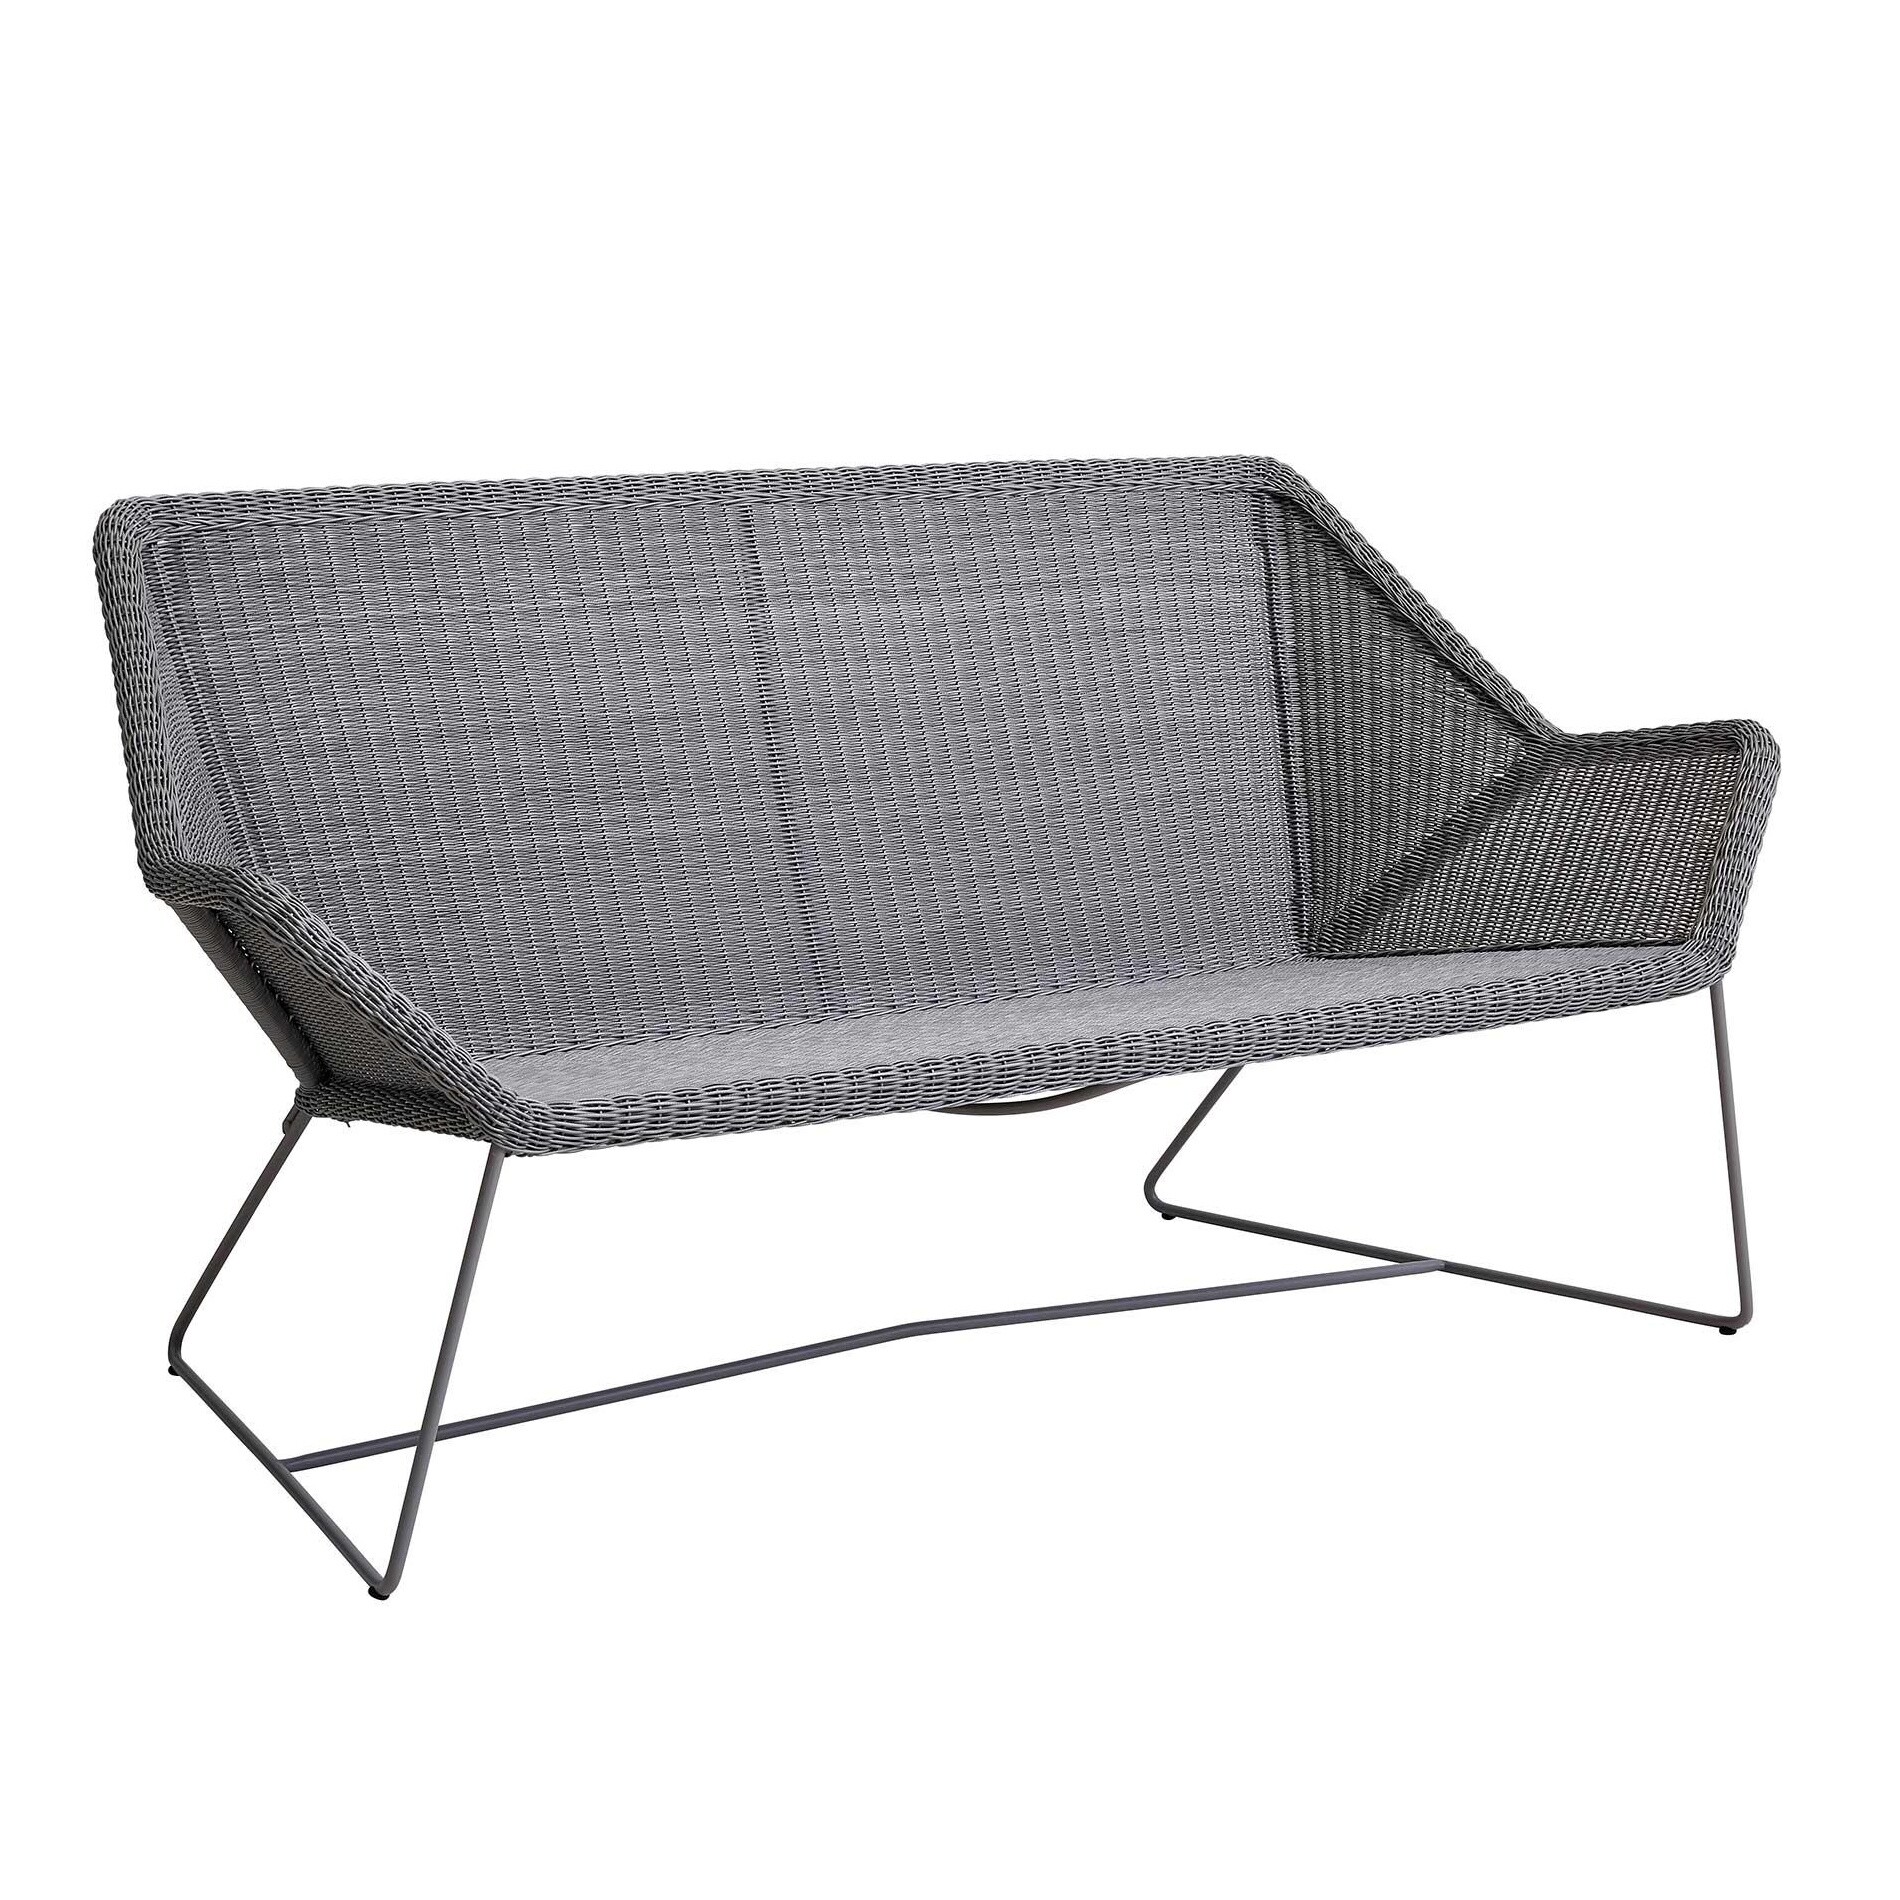 Cane-Line Breeze Outdoor Lounge Sofa 2 Seater | AmbienteDirect